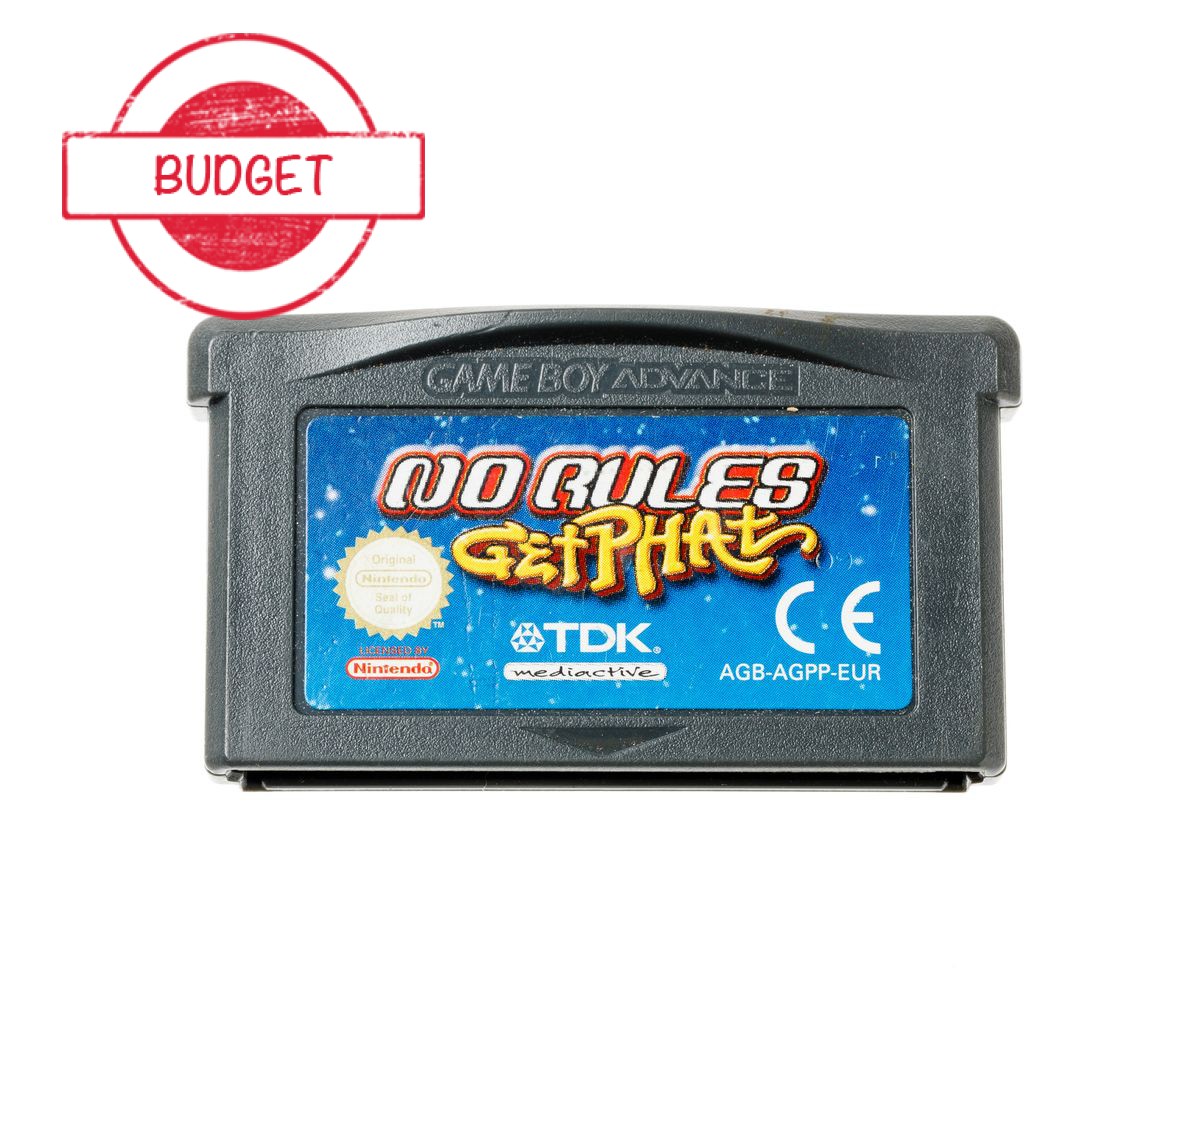 No Rules Get Phat - Budget - Gameboy Advance Games